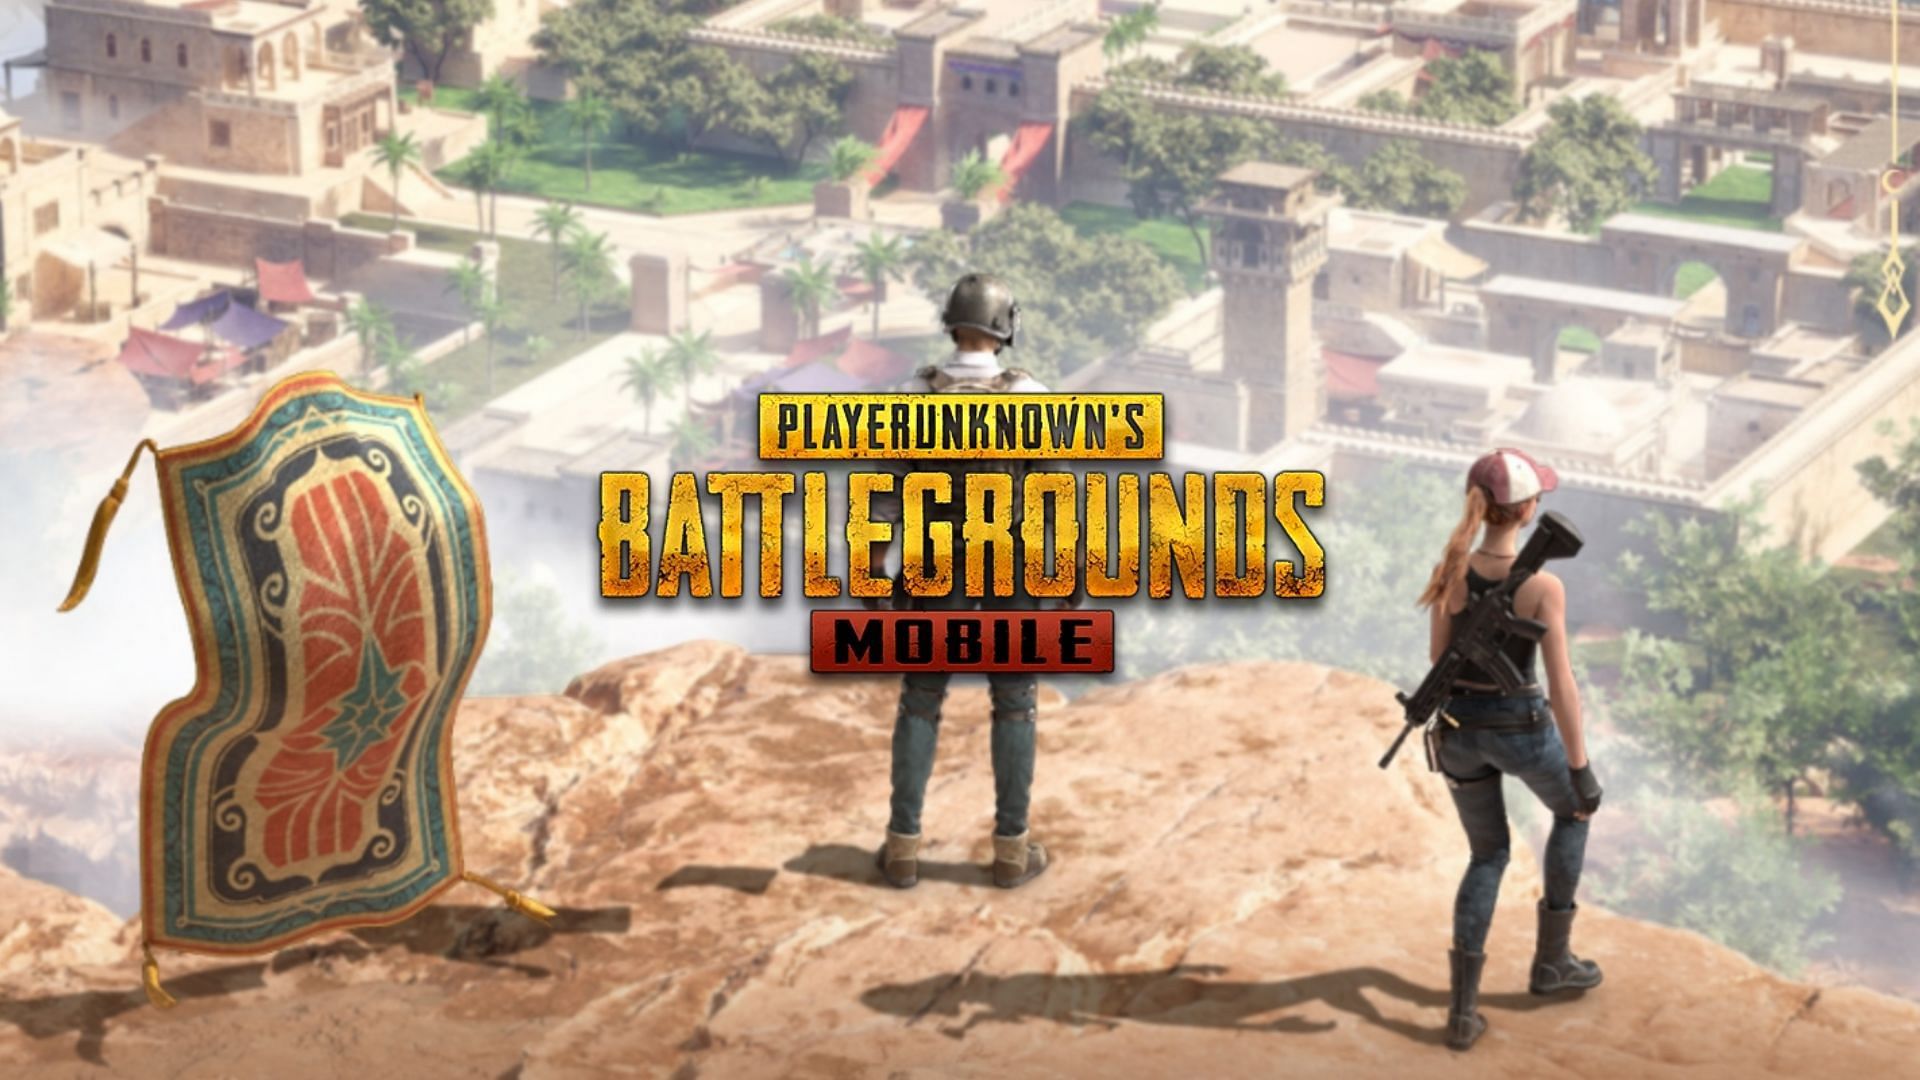 Android and iOS users can download PUBG Mobile 3.1 update (Image via Krafton) 